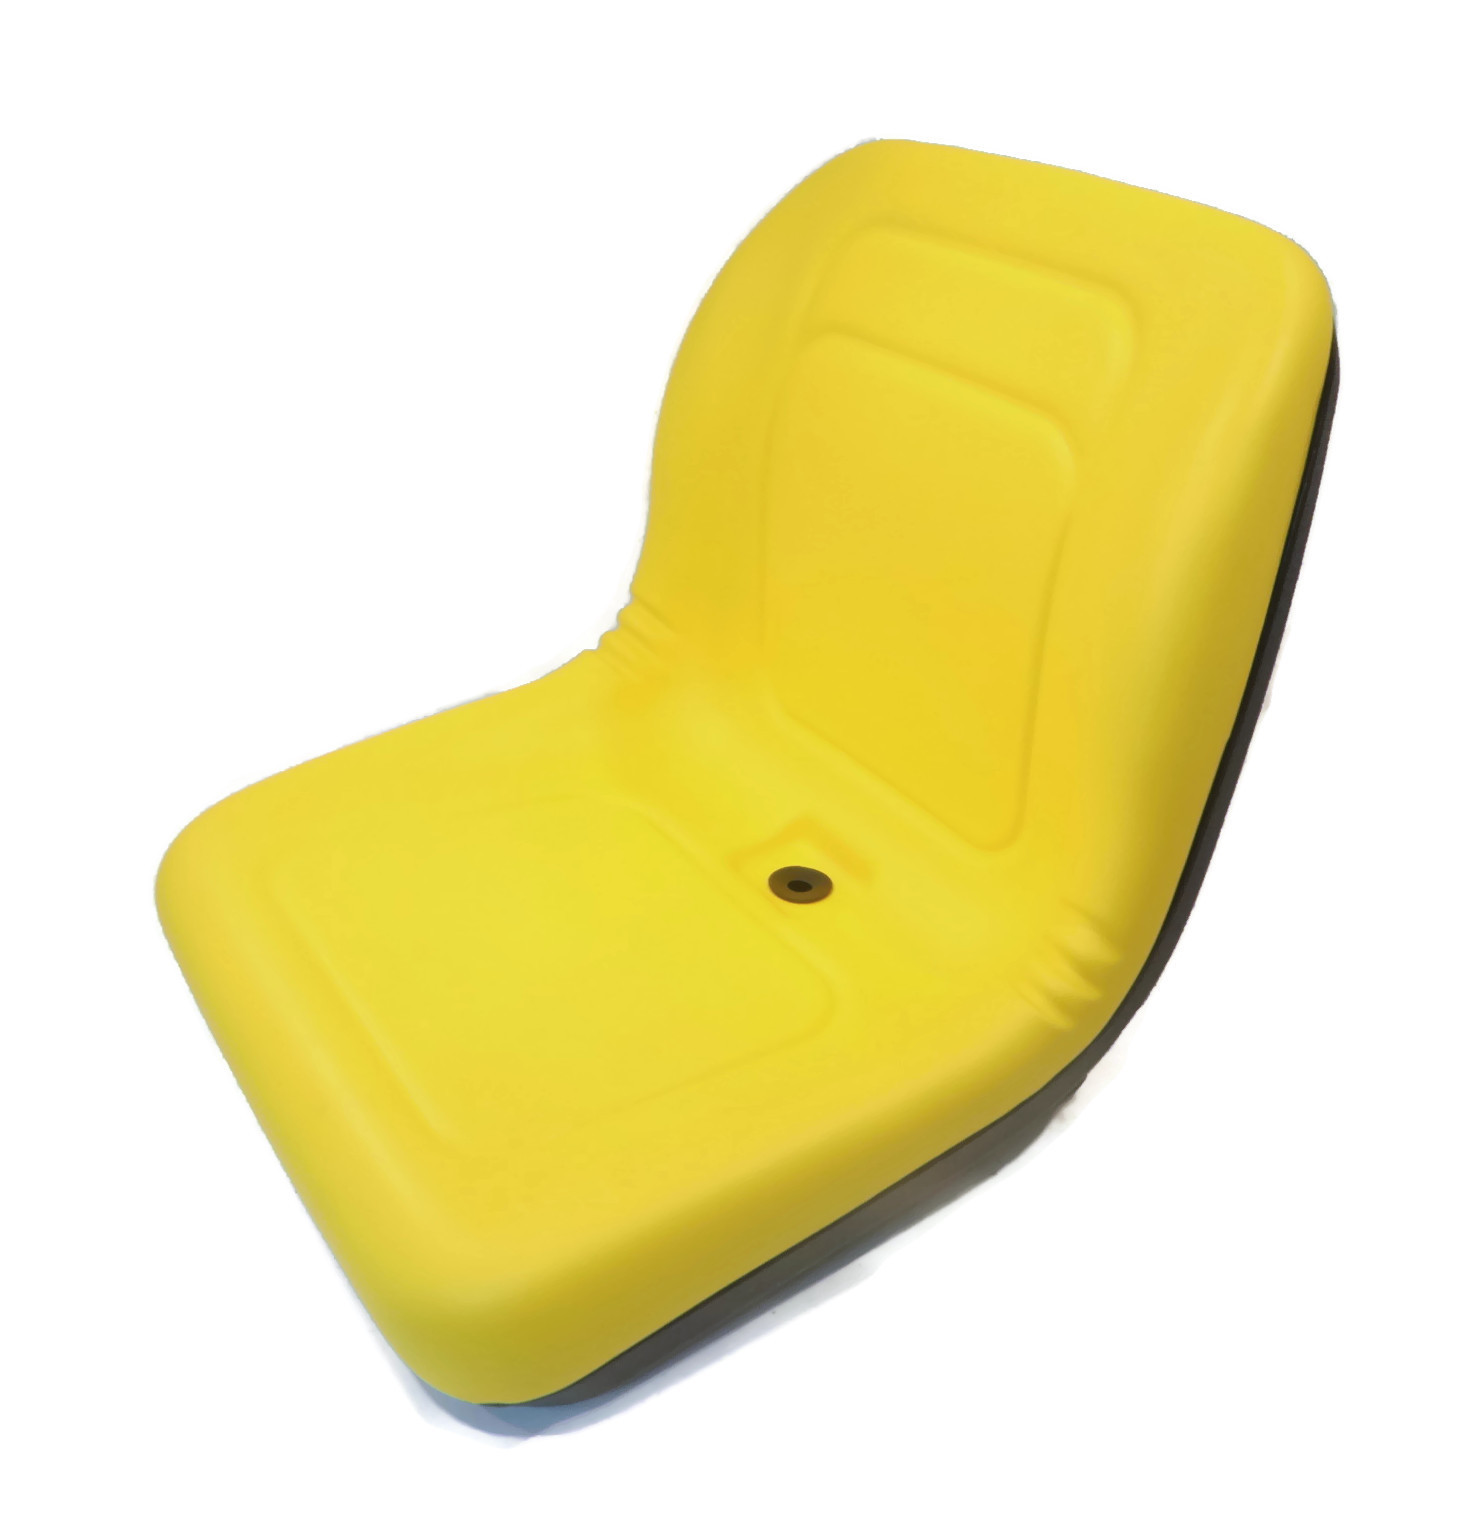 The ROP Shop | (2) Yellow High Back Seat For John Deere LVA10029 AM129969 AM129970 AM133476 - image 1 of 5